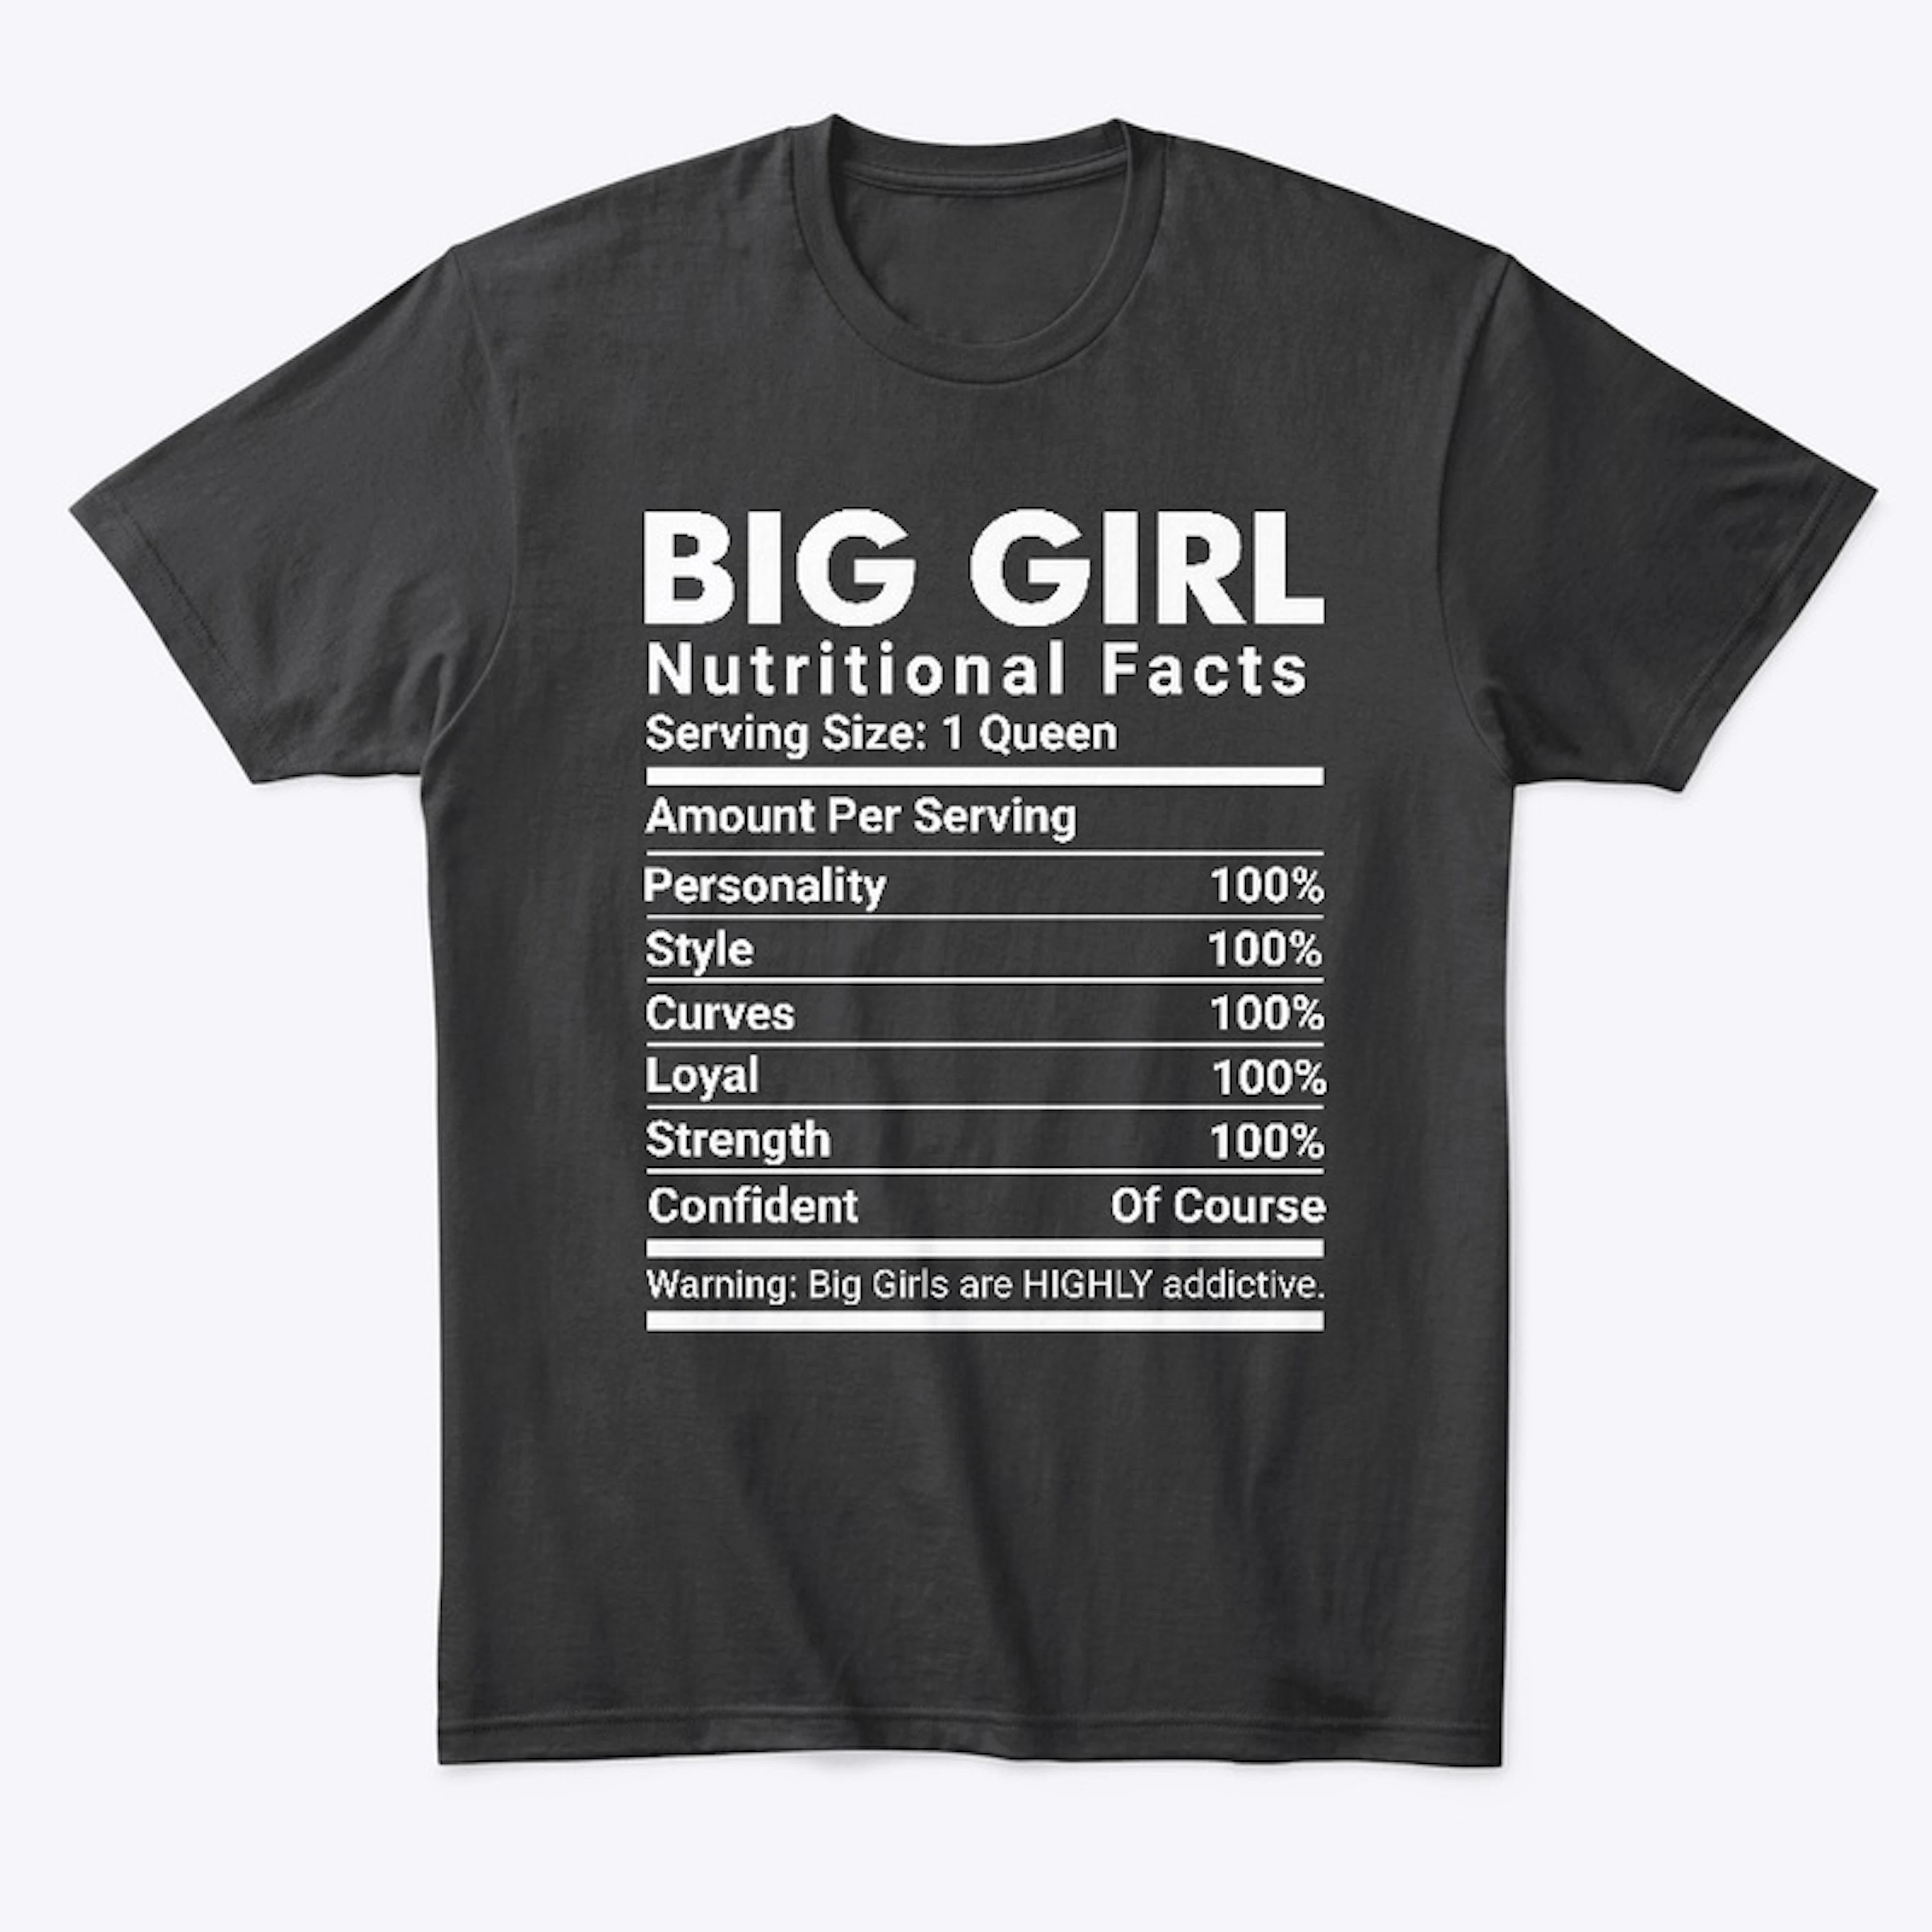 Big Girl Nutritional Facts